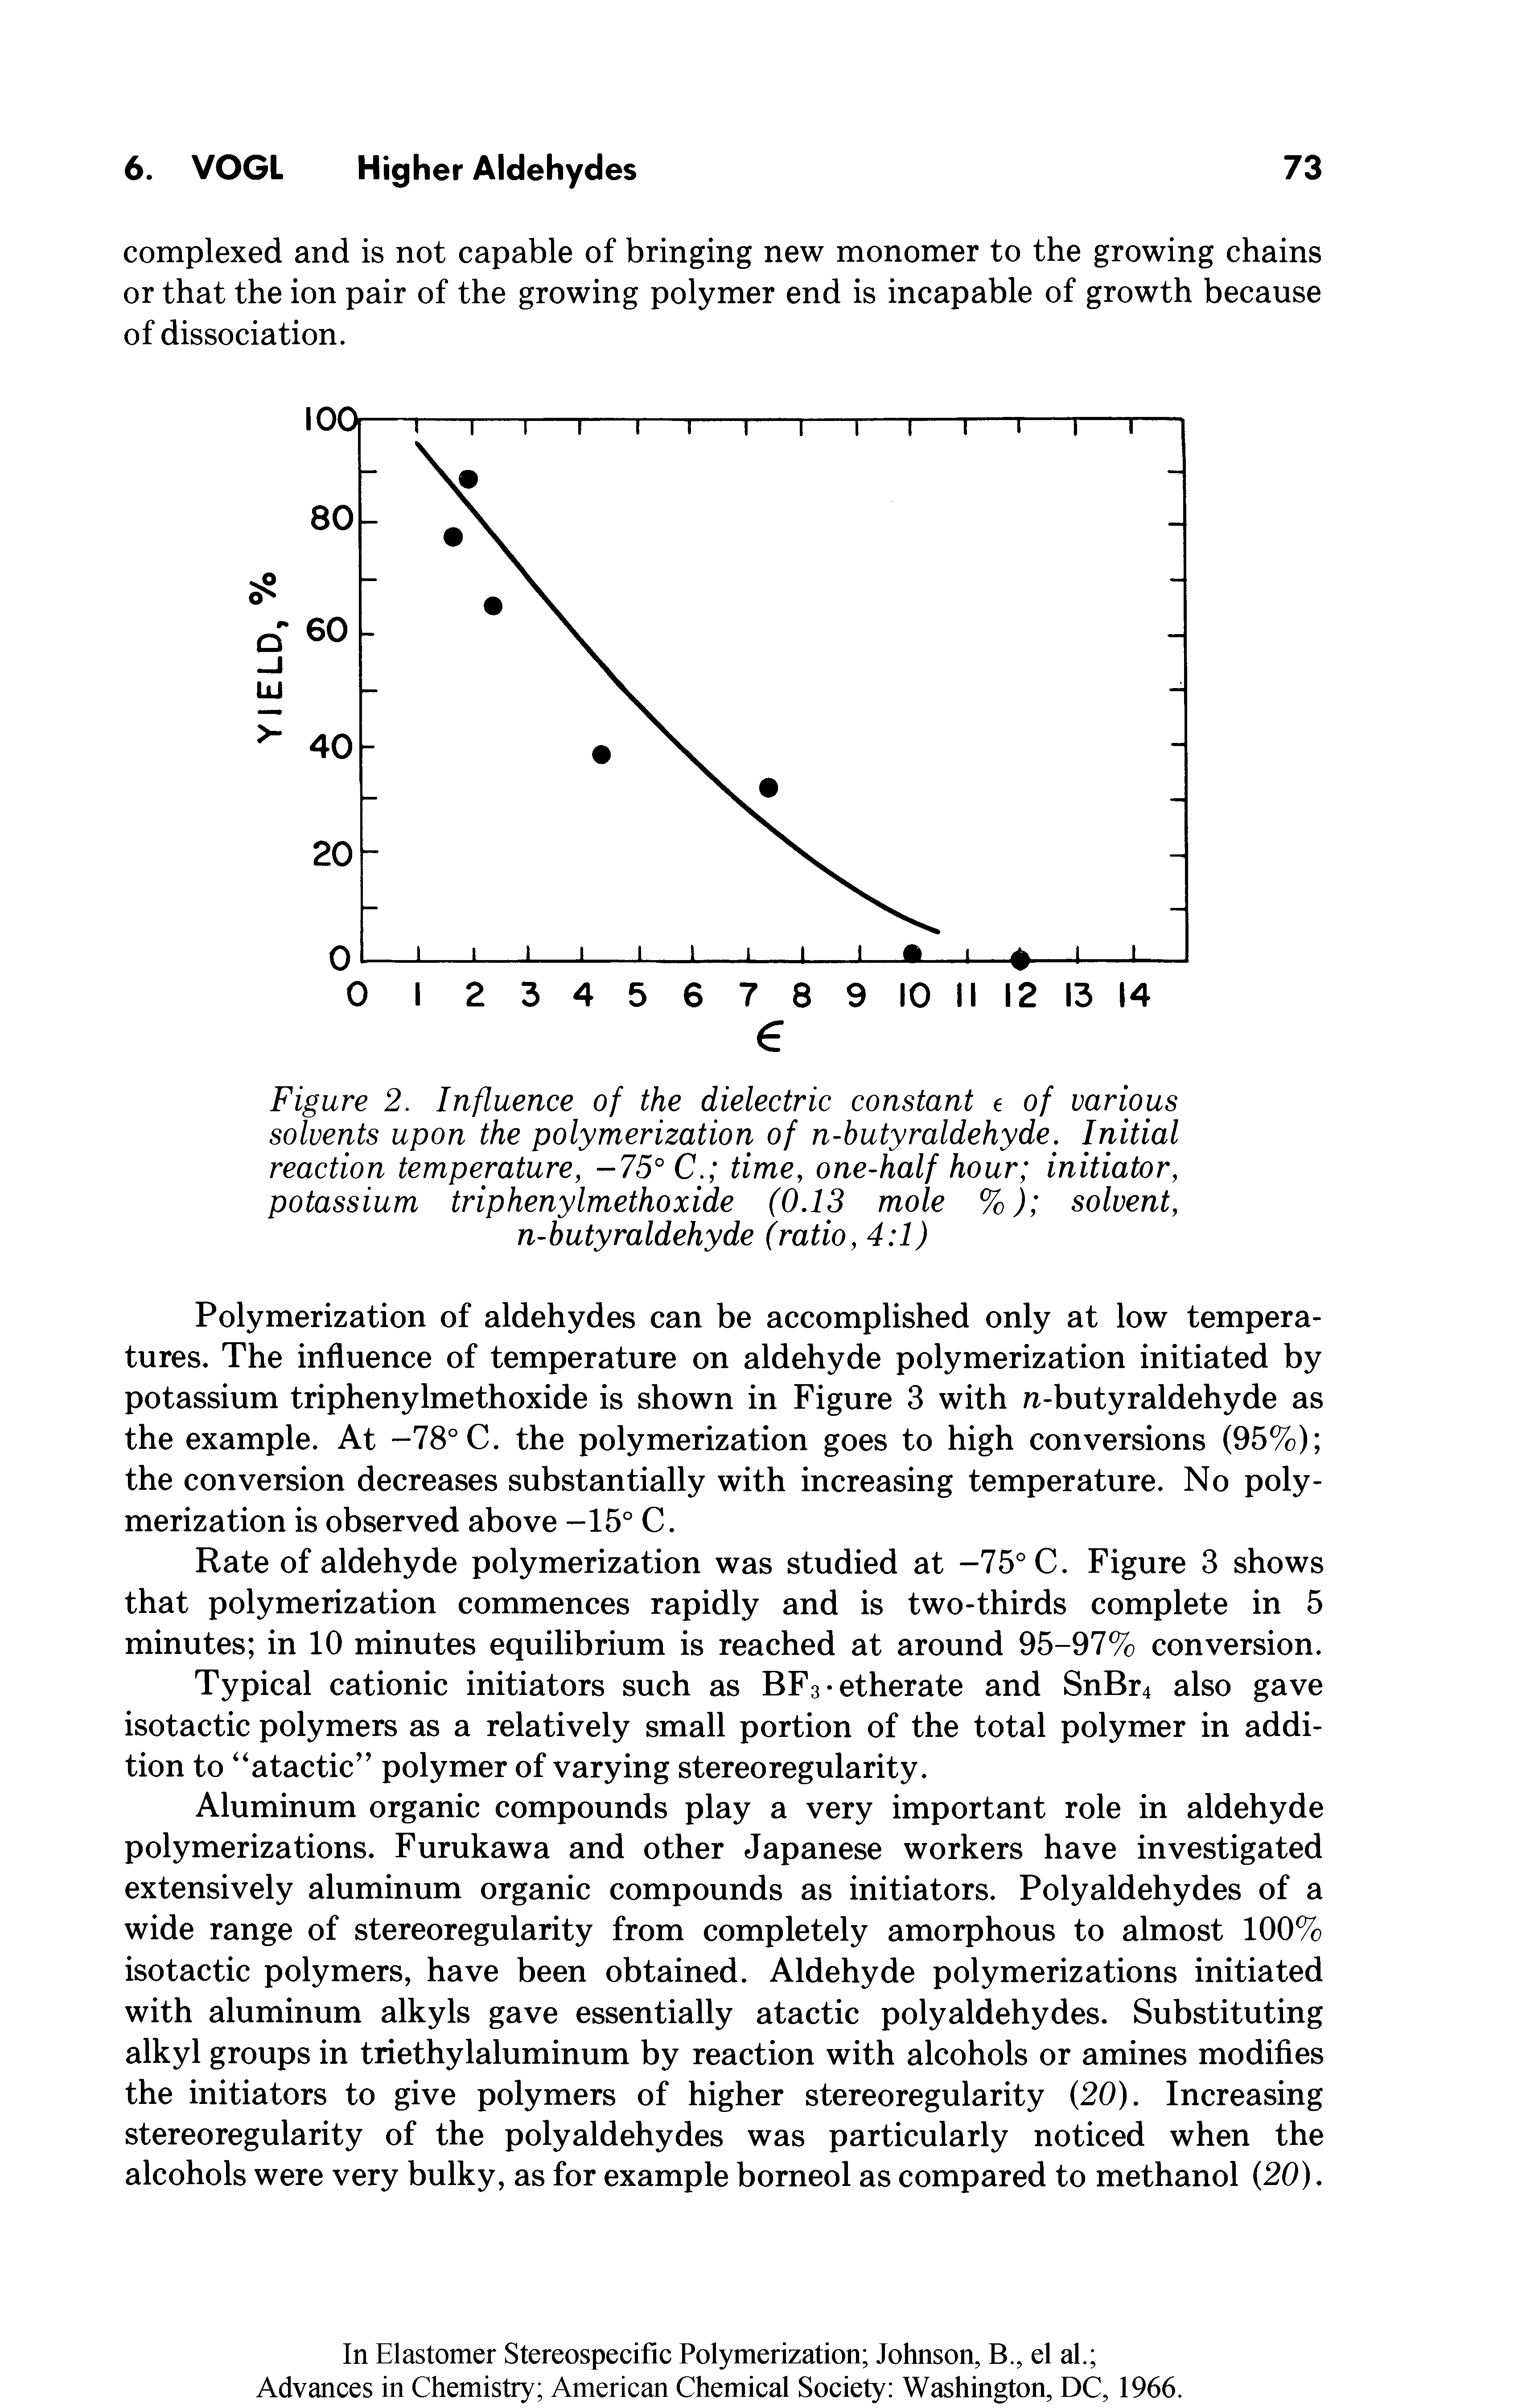 Figure 2. Influence of the dielectric constant e of various solvents upon the polymerization of n-butyraldehyde. Initial reaction temperature, -75° C. time, one-half hour initiator, potassium triphenylmethoxide (0.13 mole %) solvent, n-butyraldehyde (ratio, 4 1)...